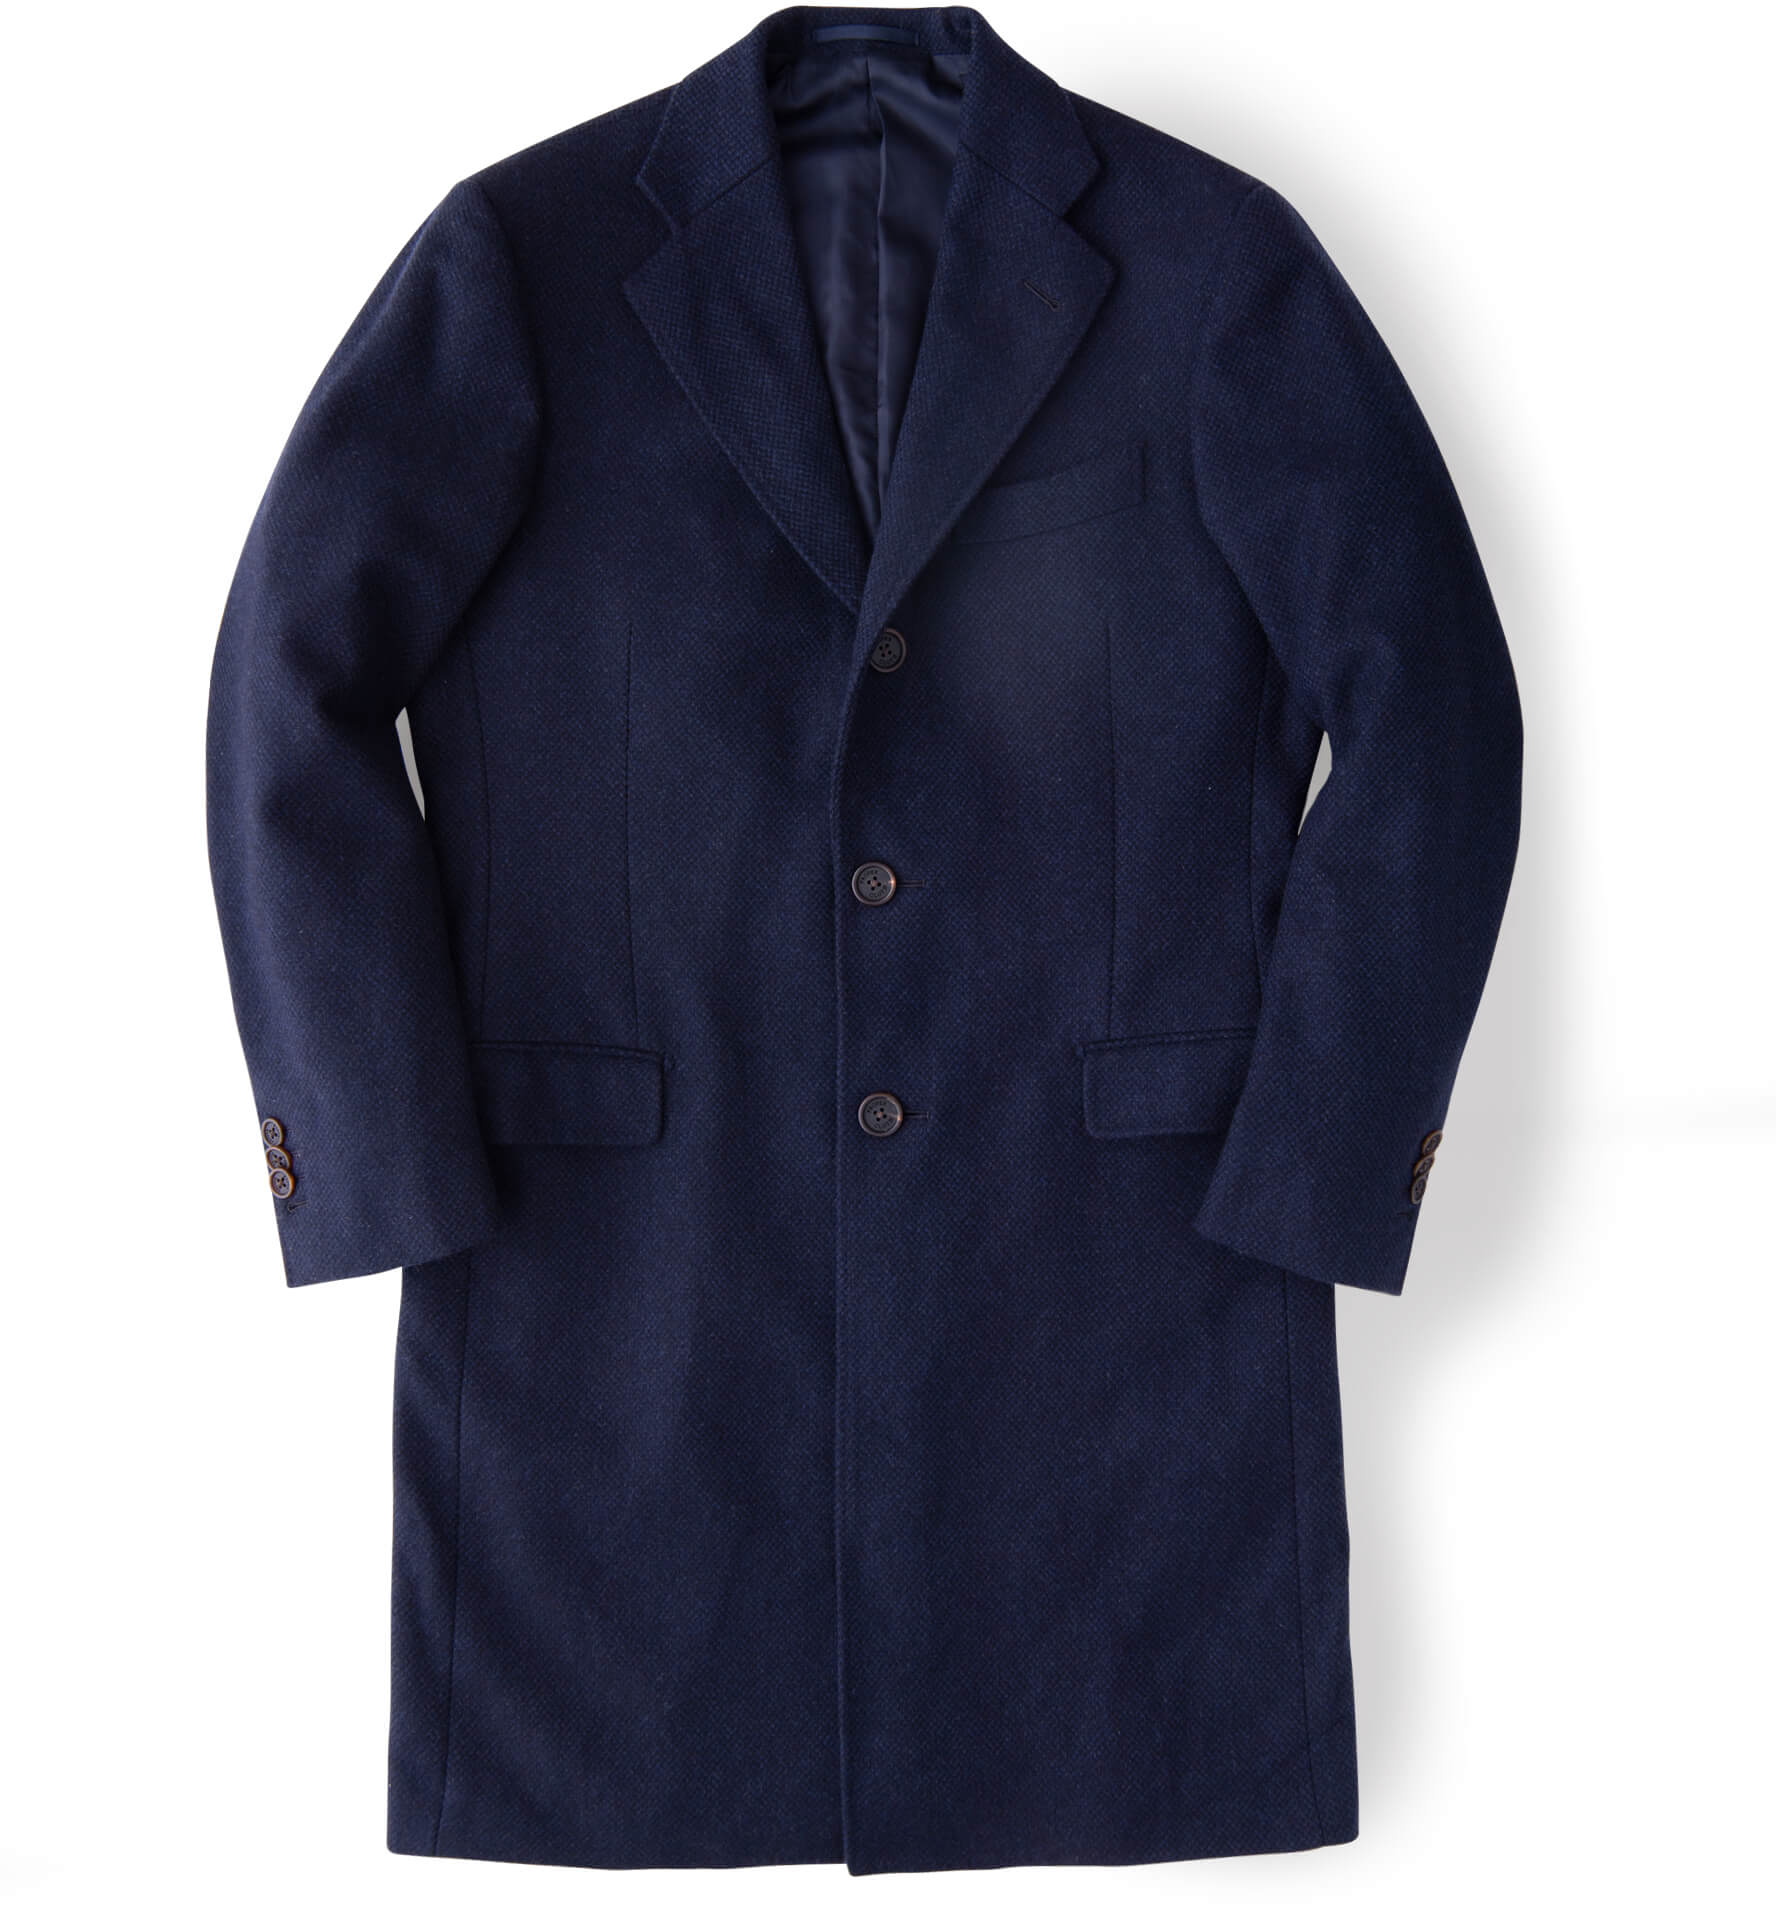 Bleecker Navy Wool and Cashmere Coat by Proper Cloth